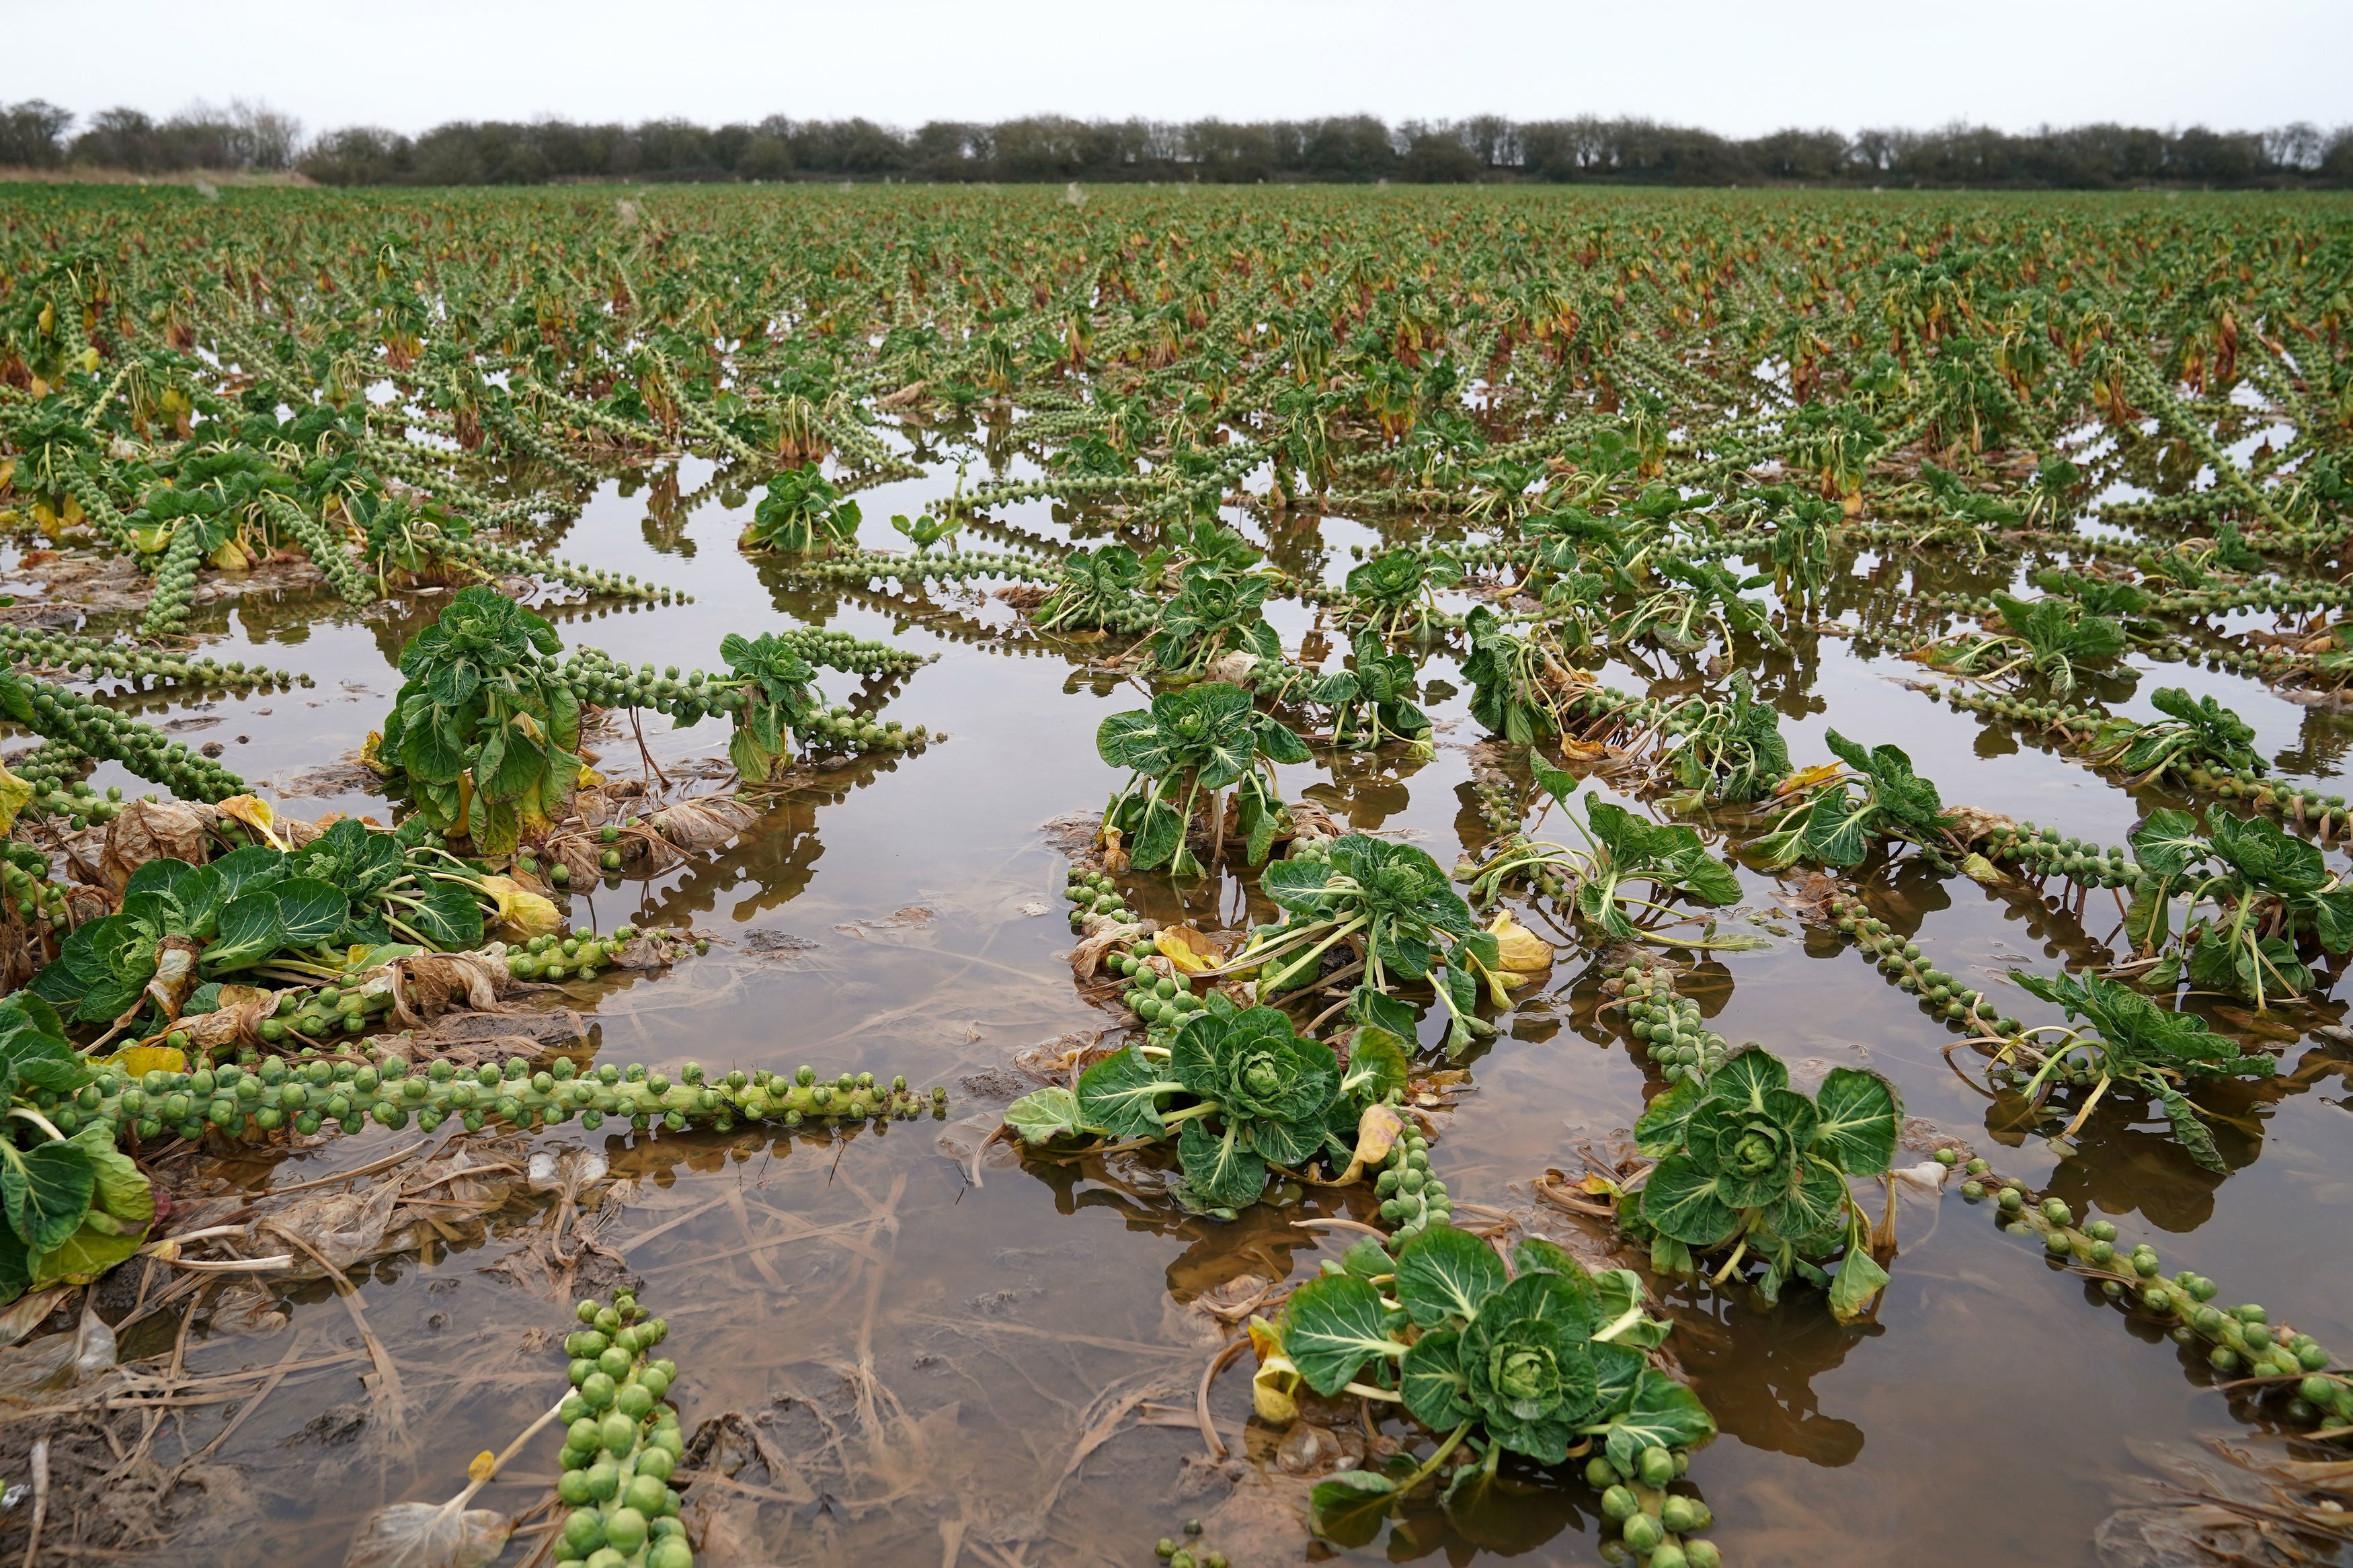 A flooded field of brussels sprouts in Lincolnshire, as the UK faces wet and warmer weather due to climate change